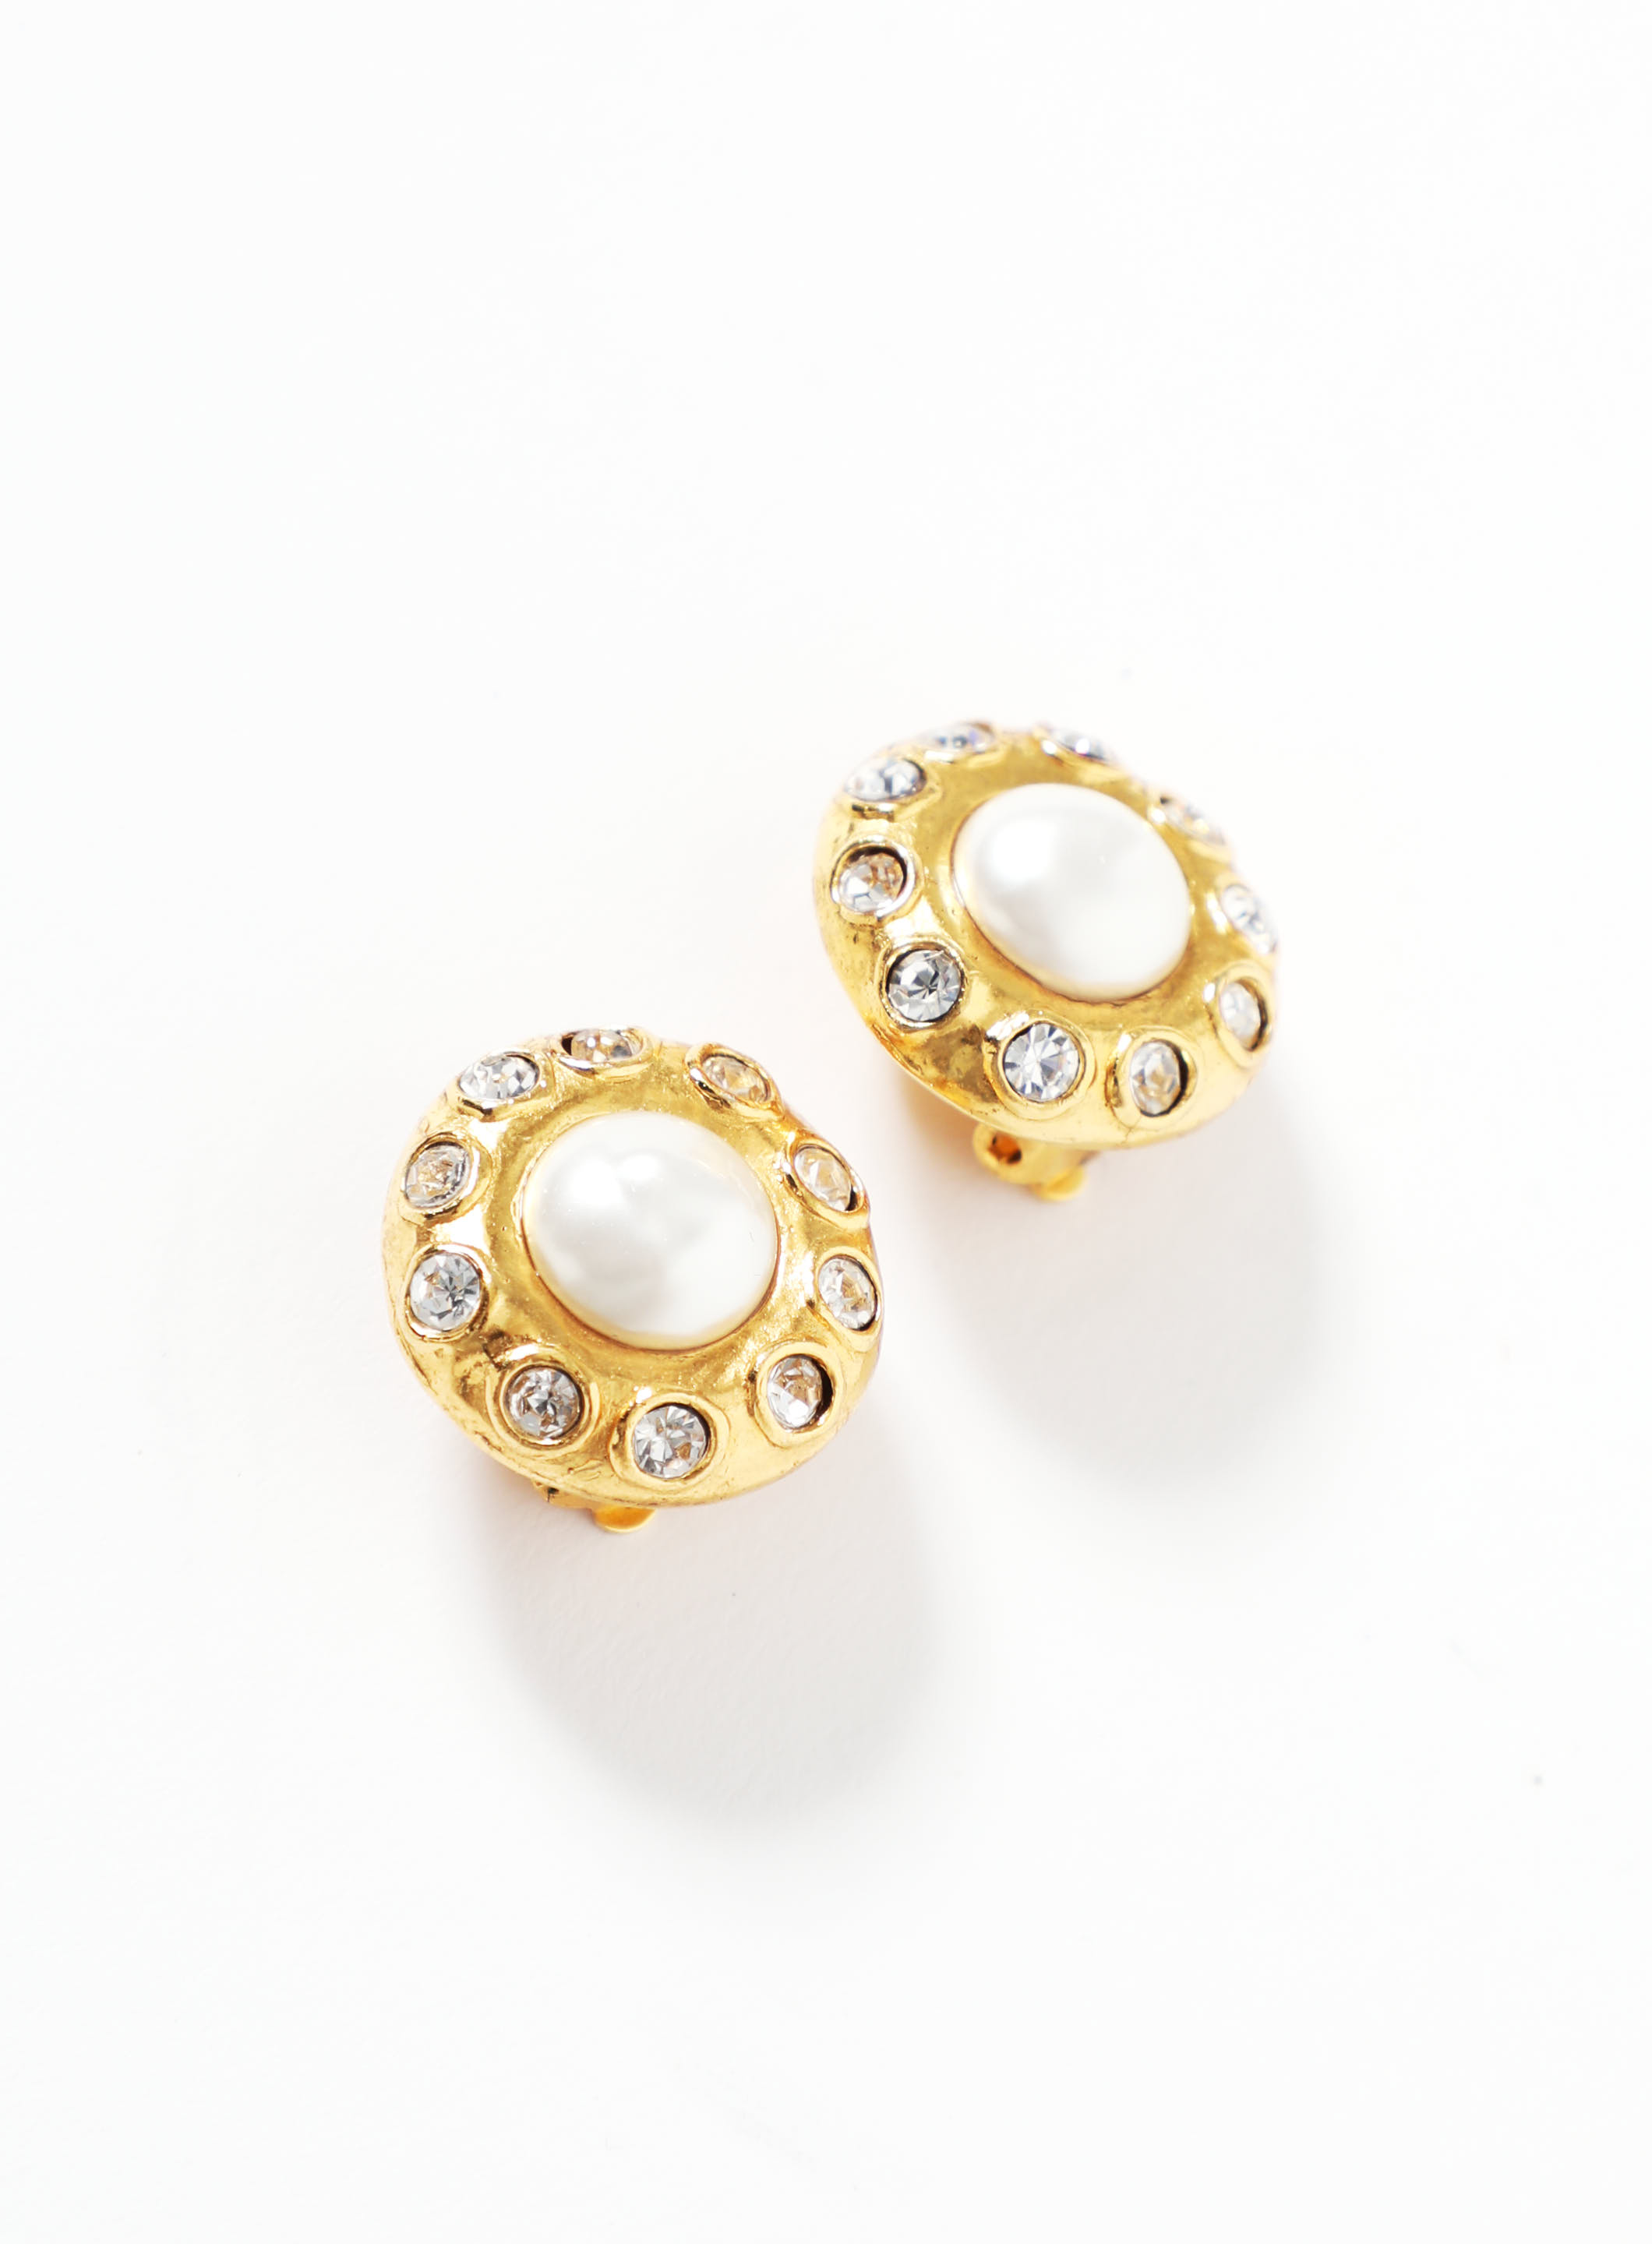 Chanel Strass and Gold Metal Earrings, 1984, Clip-On | Fashion Earrings, Vintage Jewelry (Very Good)